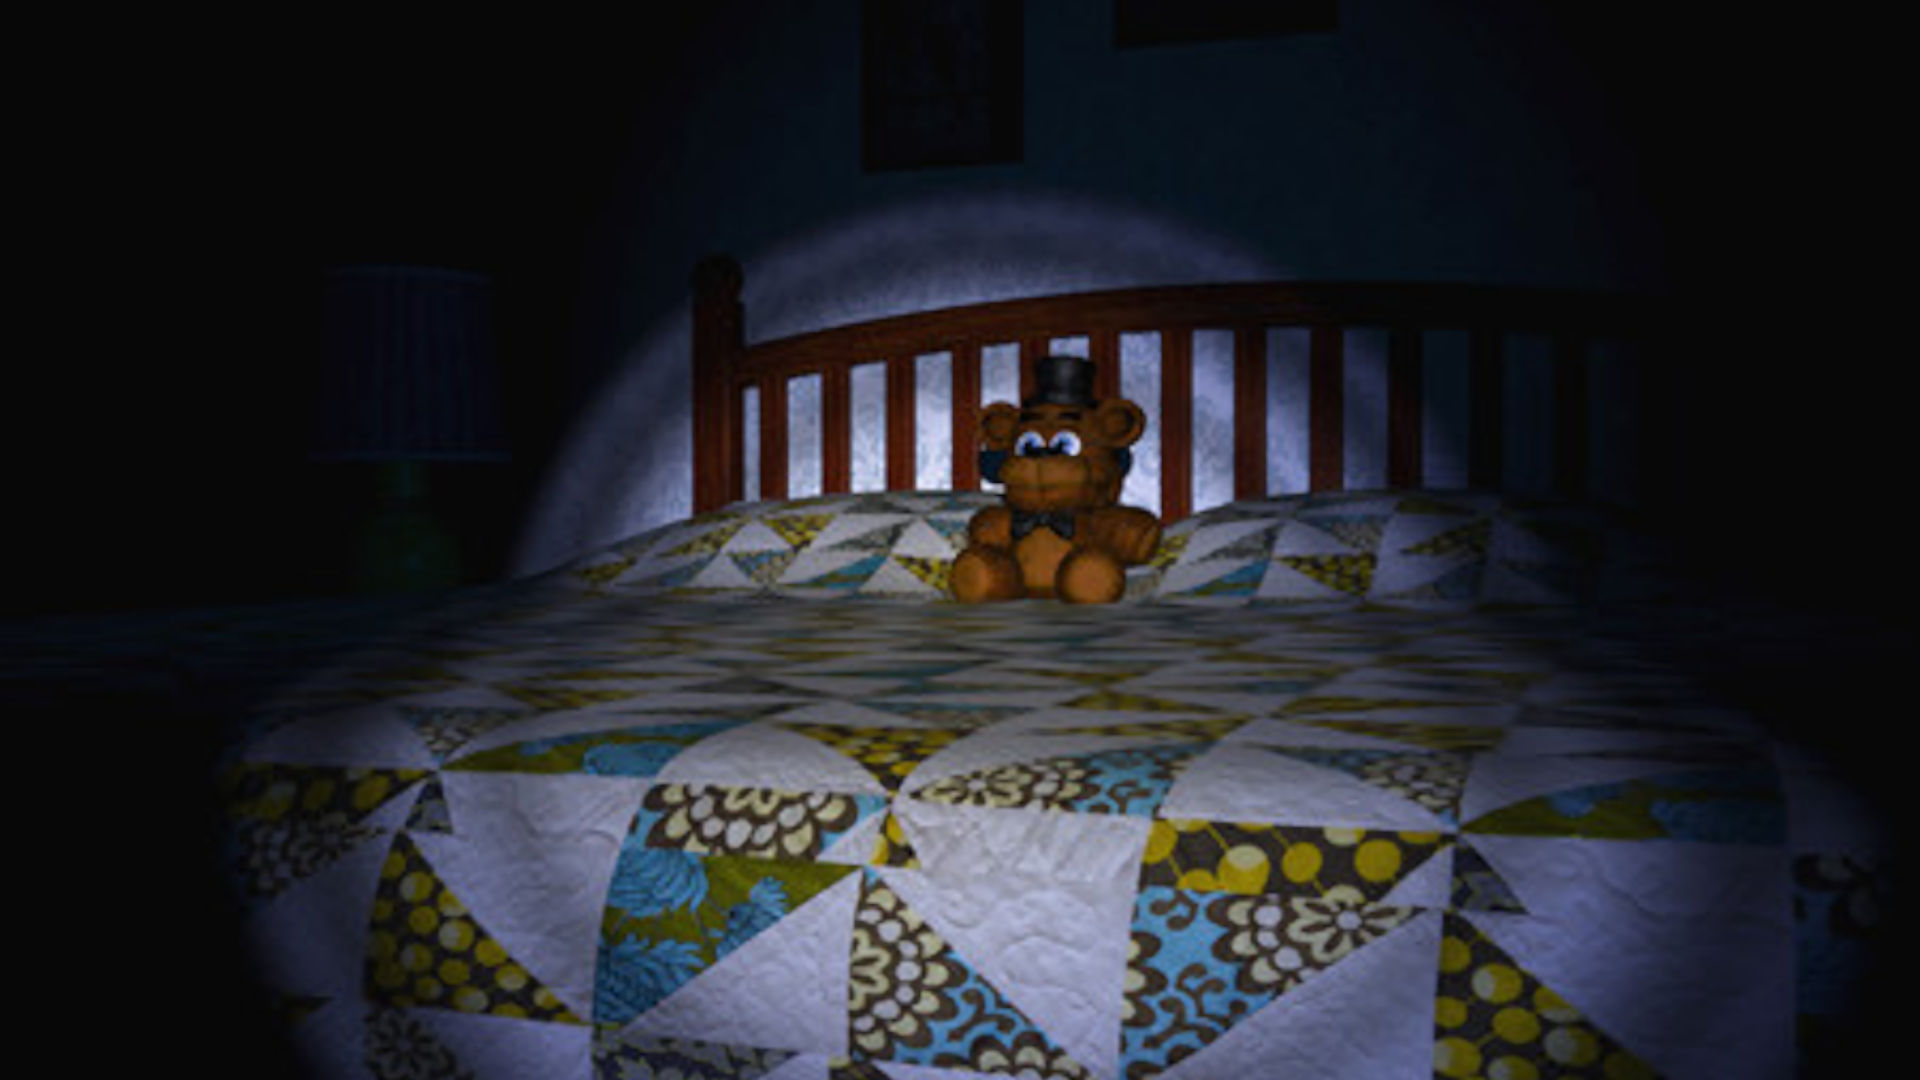 Five Nights at Freddy's (2014) - MobyGames